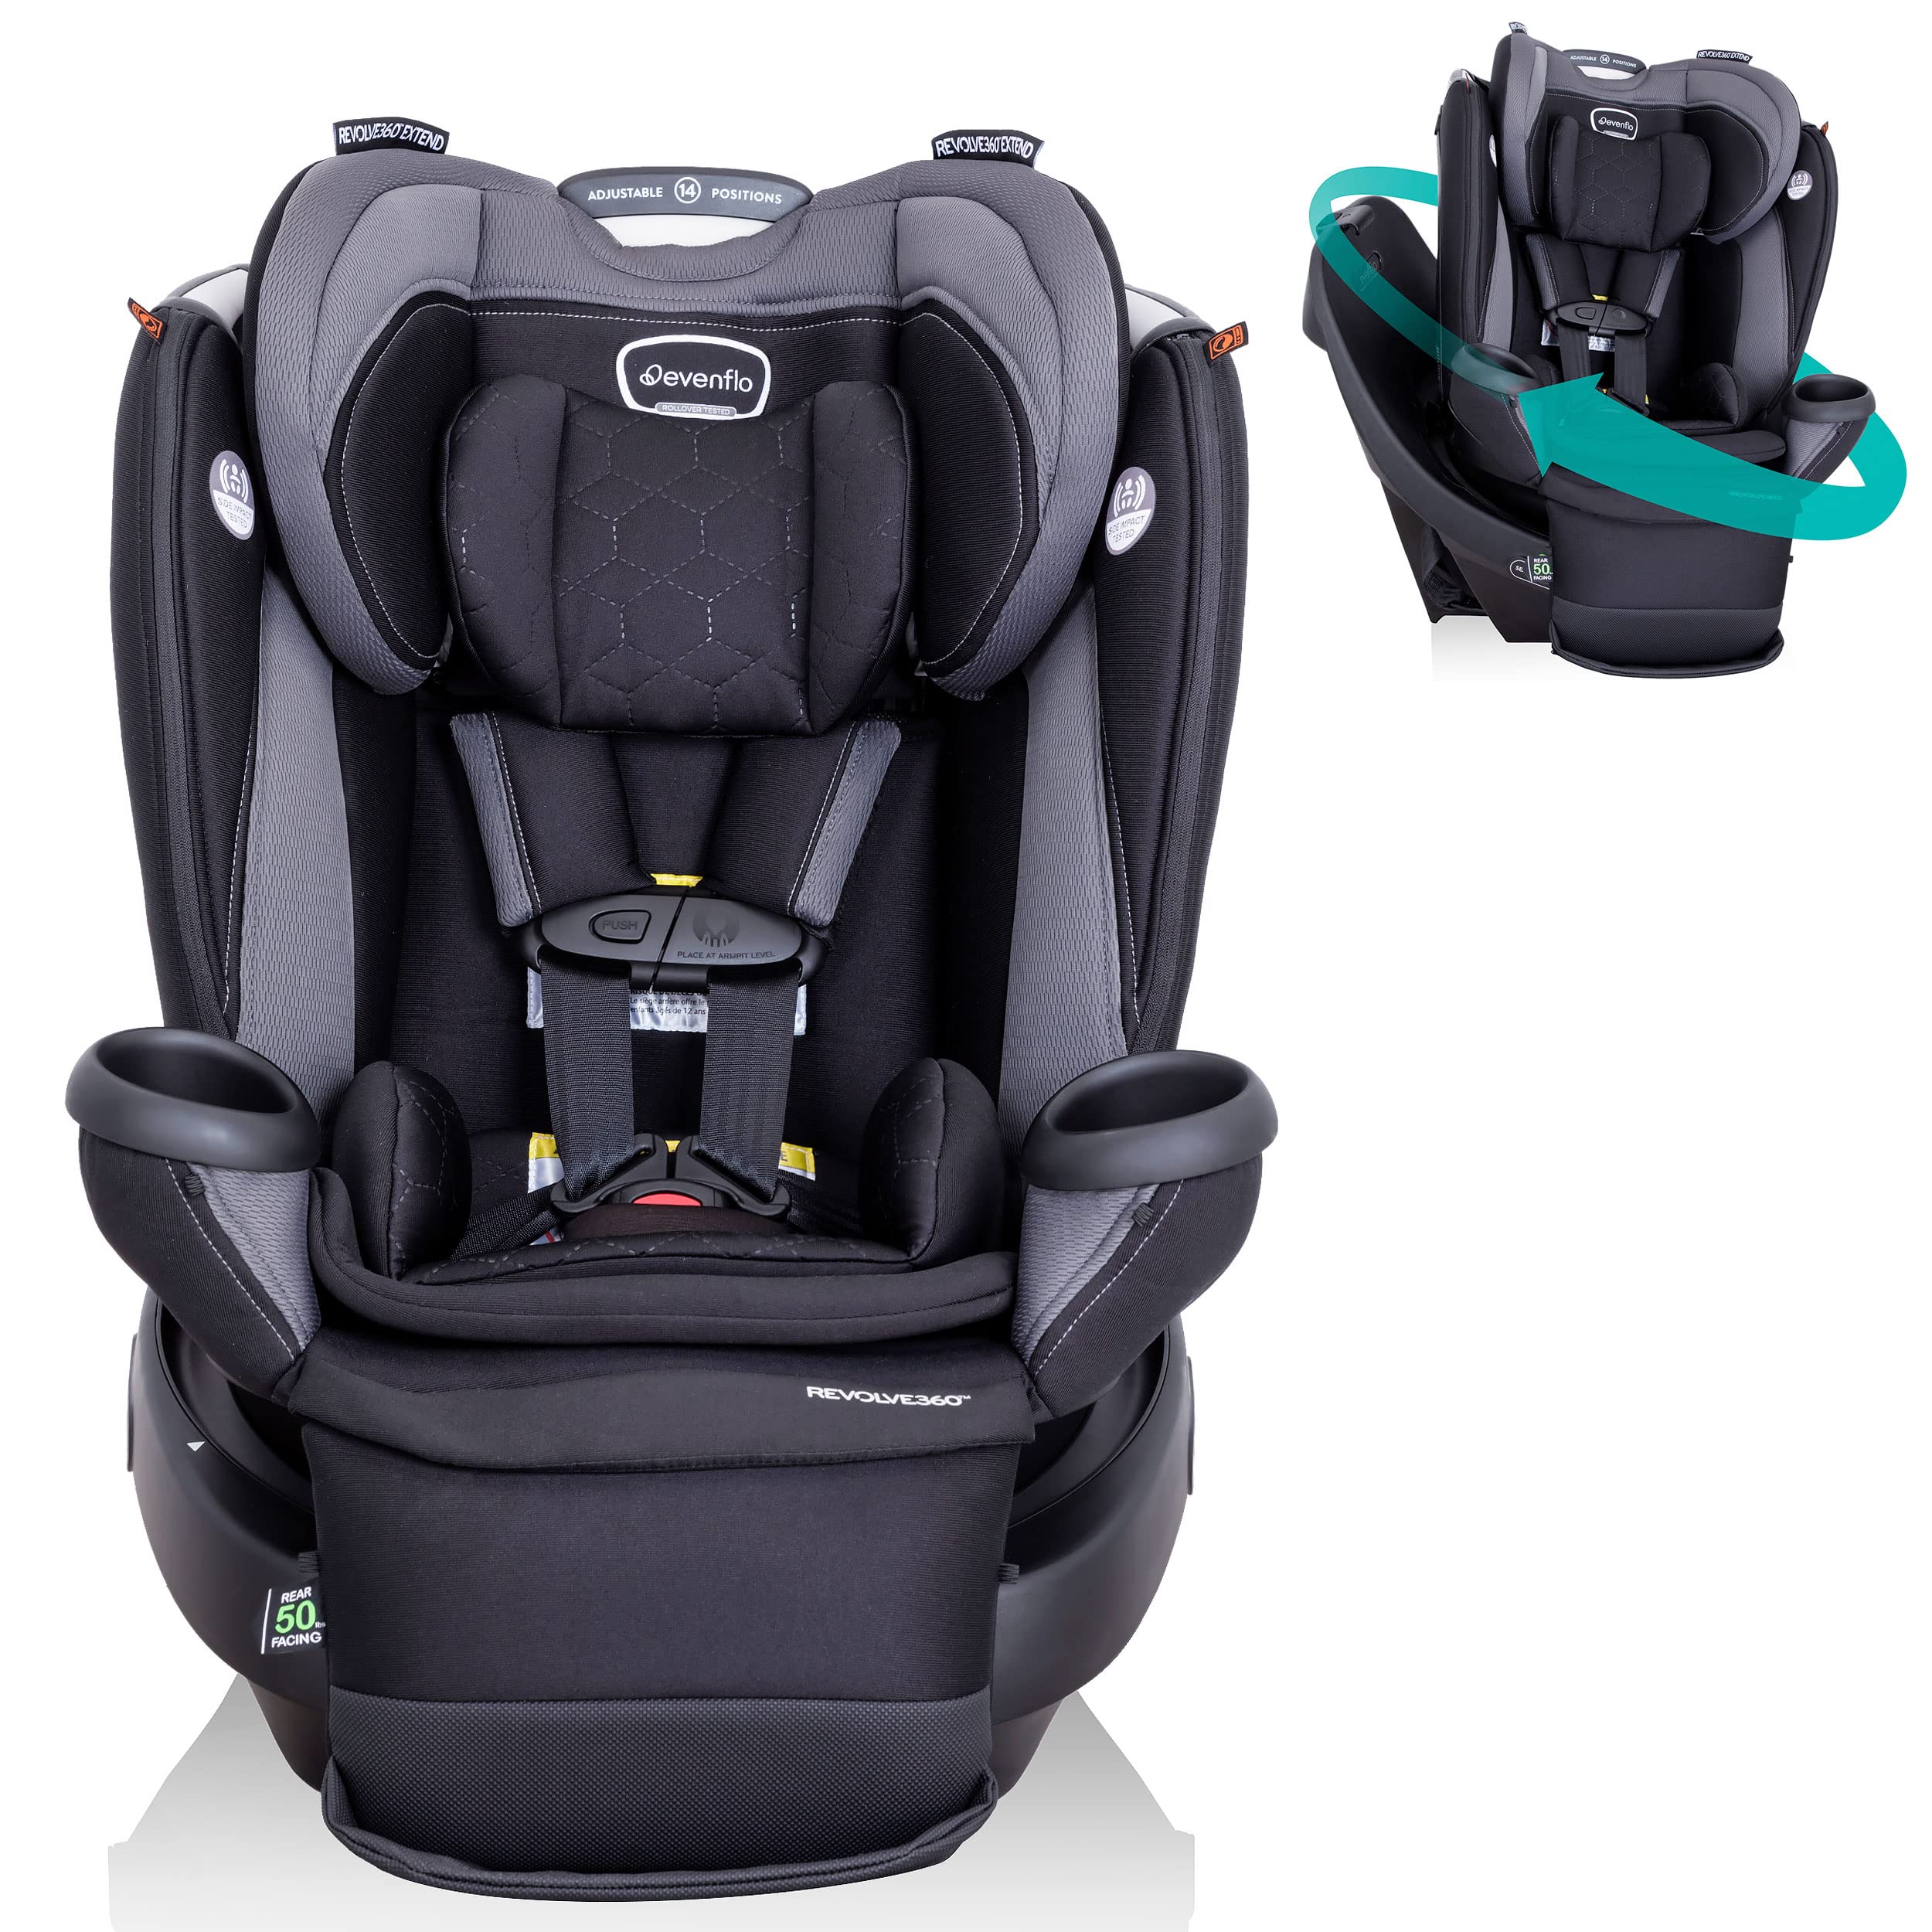 Amazon: Evenflo Revolve360 Extend All-in-One Rotational Car Seat with Quick Clean Cover (Revere Gray) $279.99